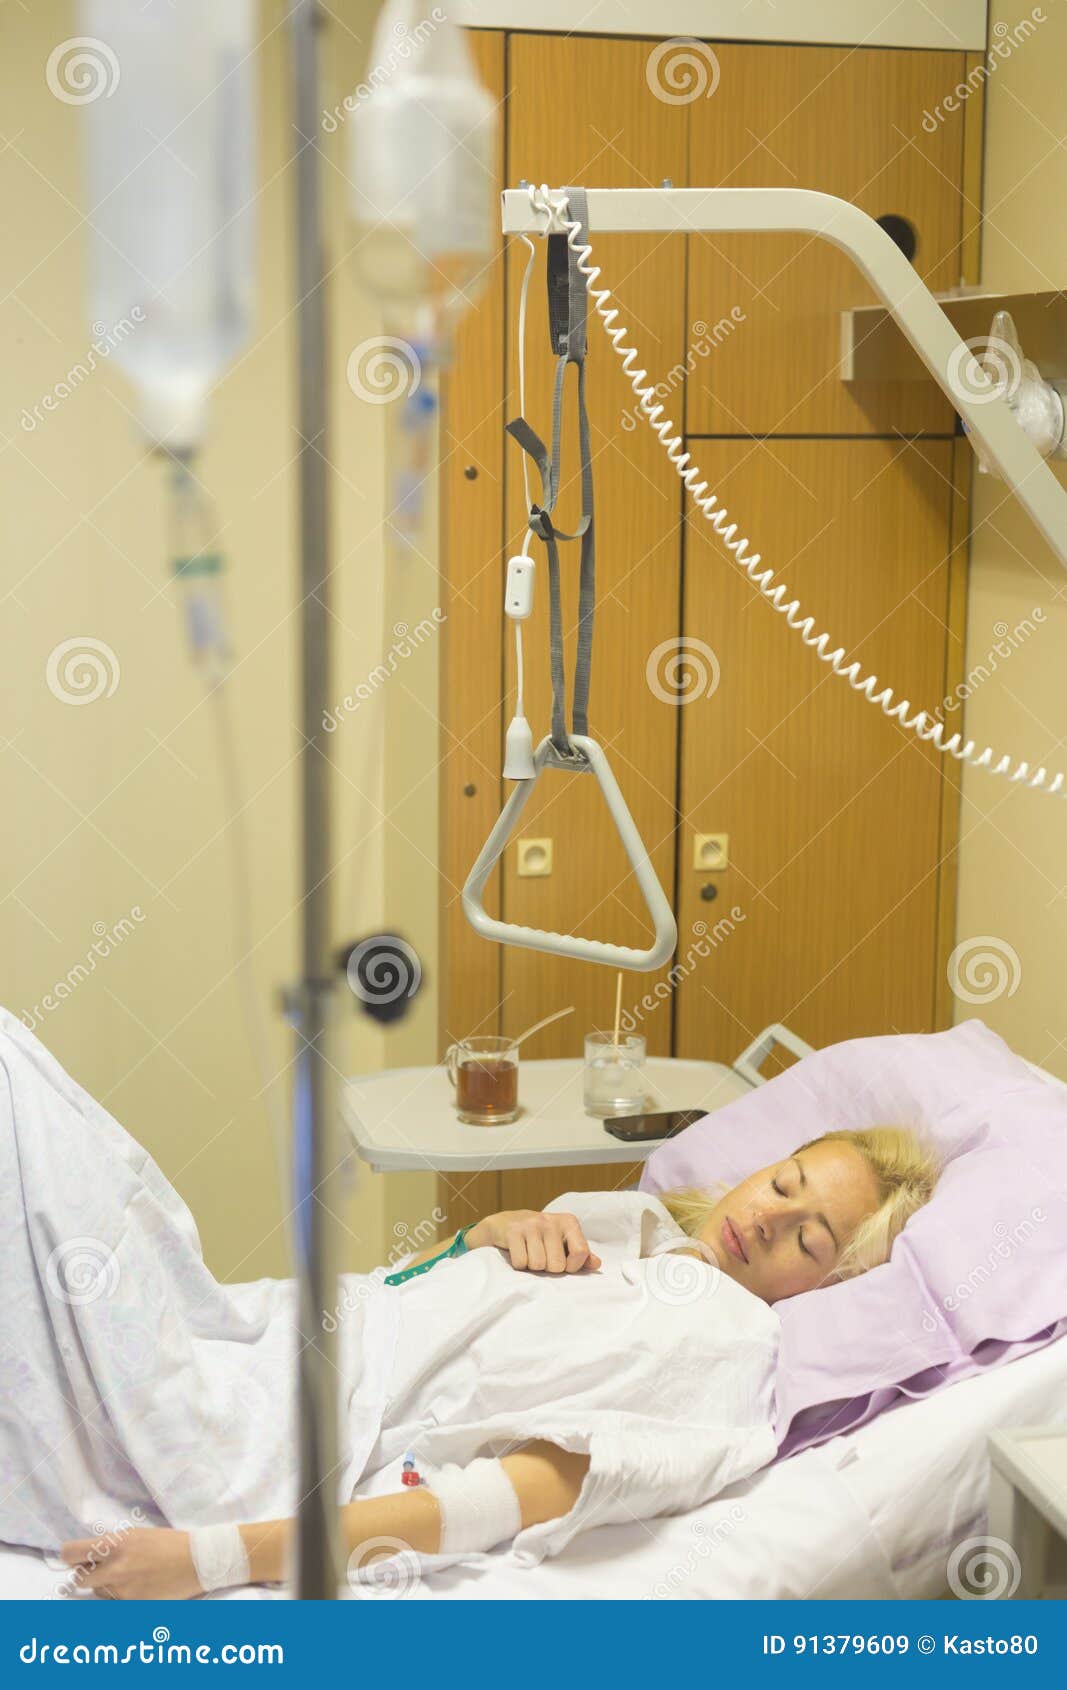 bedridden female patient recovering after surgery in hospital care.